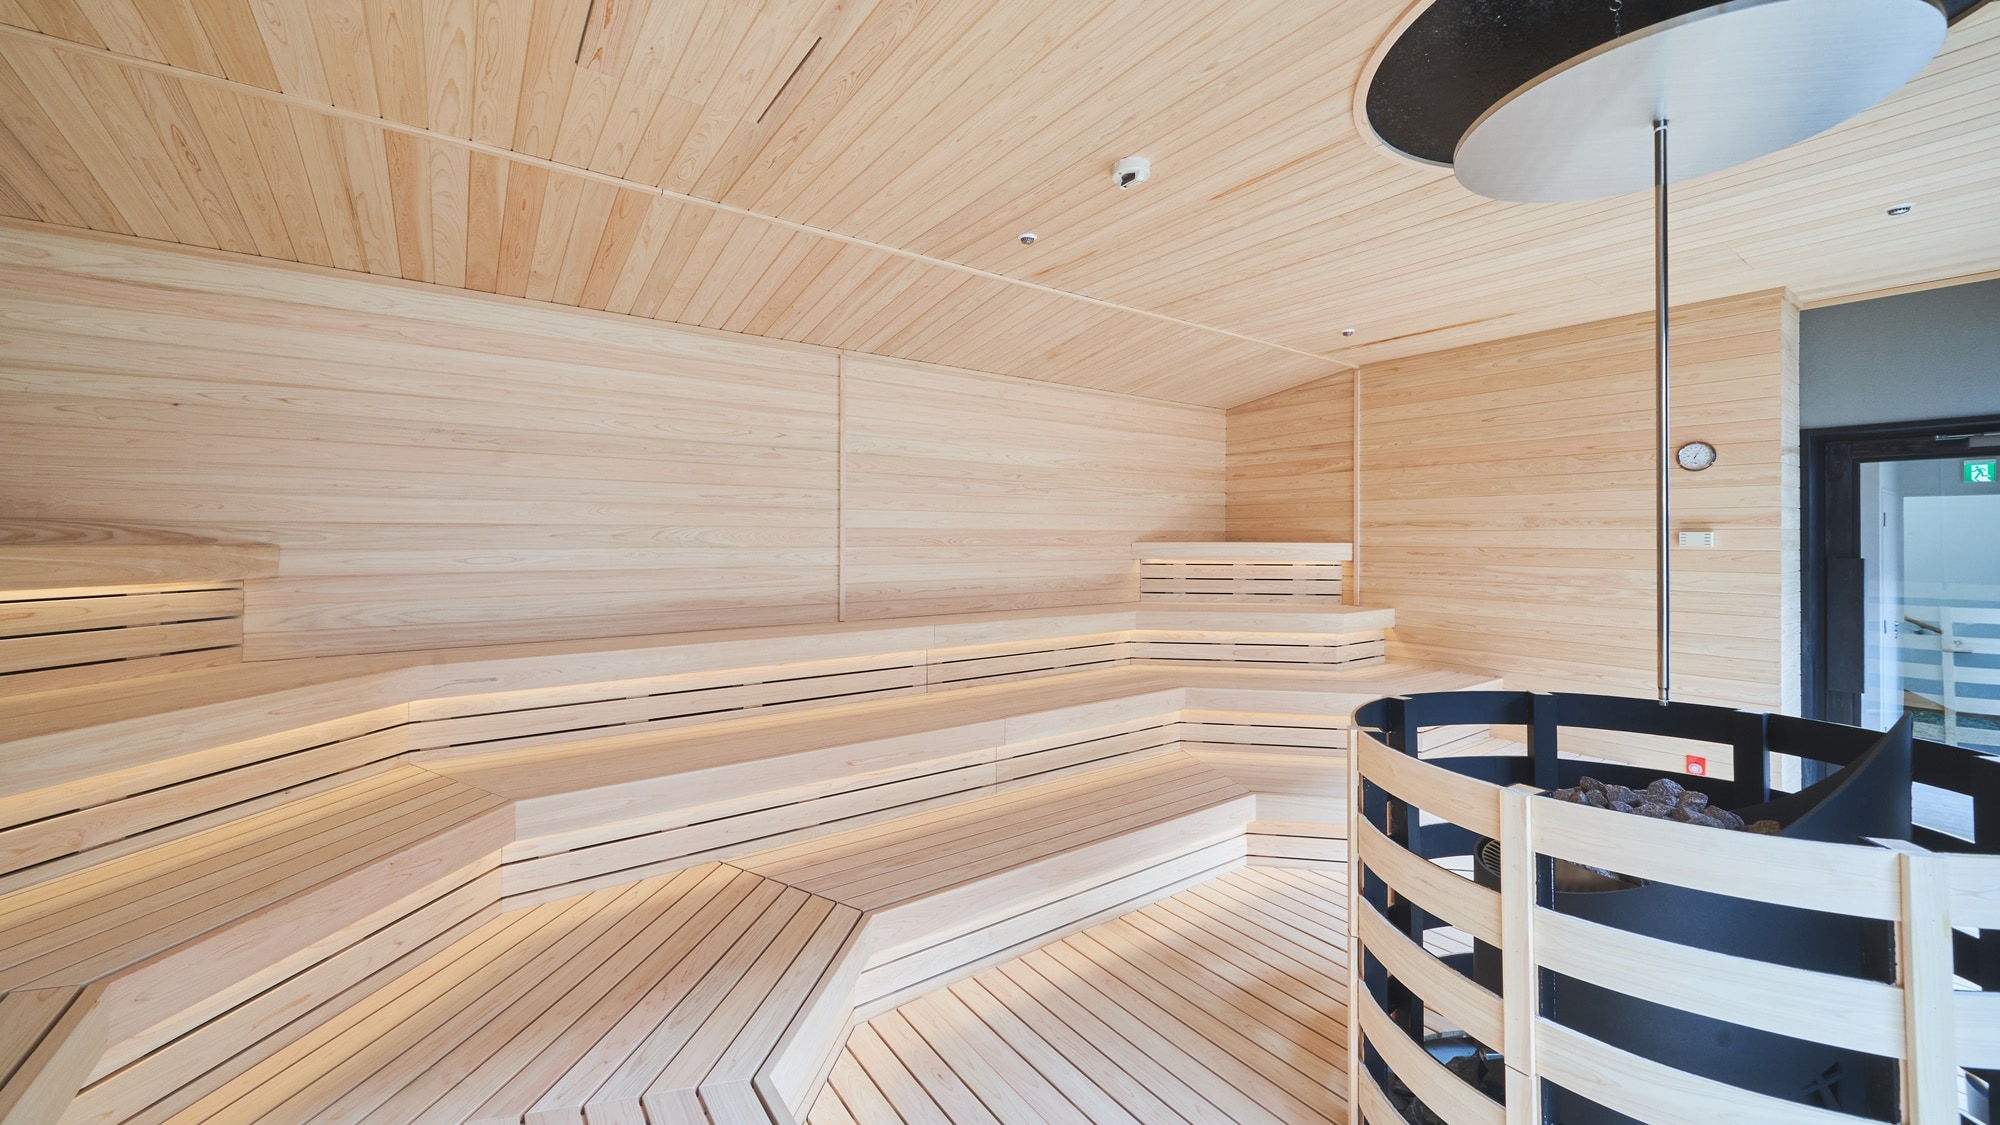 [Sauna lounge] Men and women can enjoy together, so it can be enjoyed by friends or family.